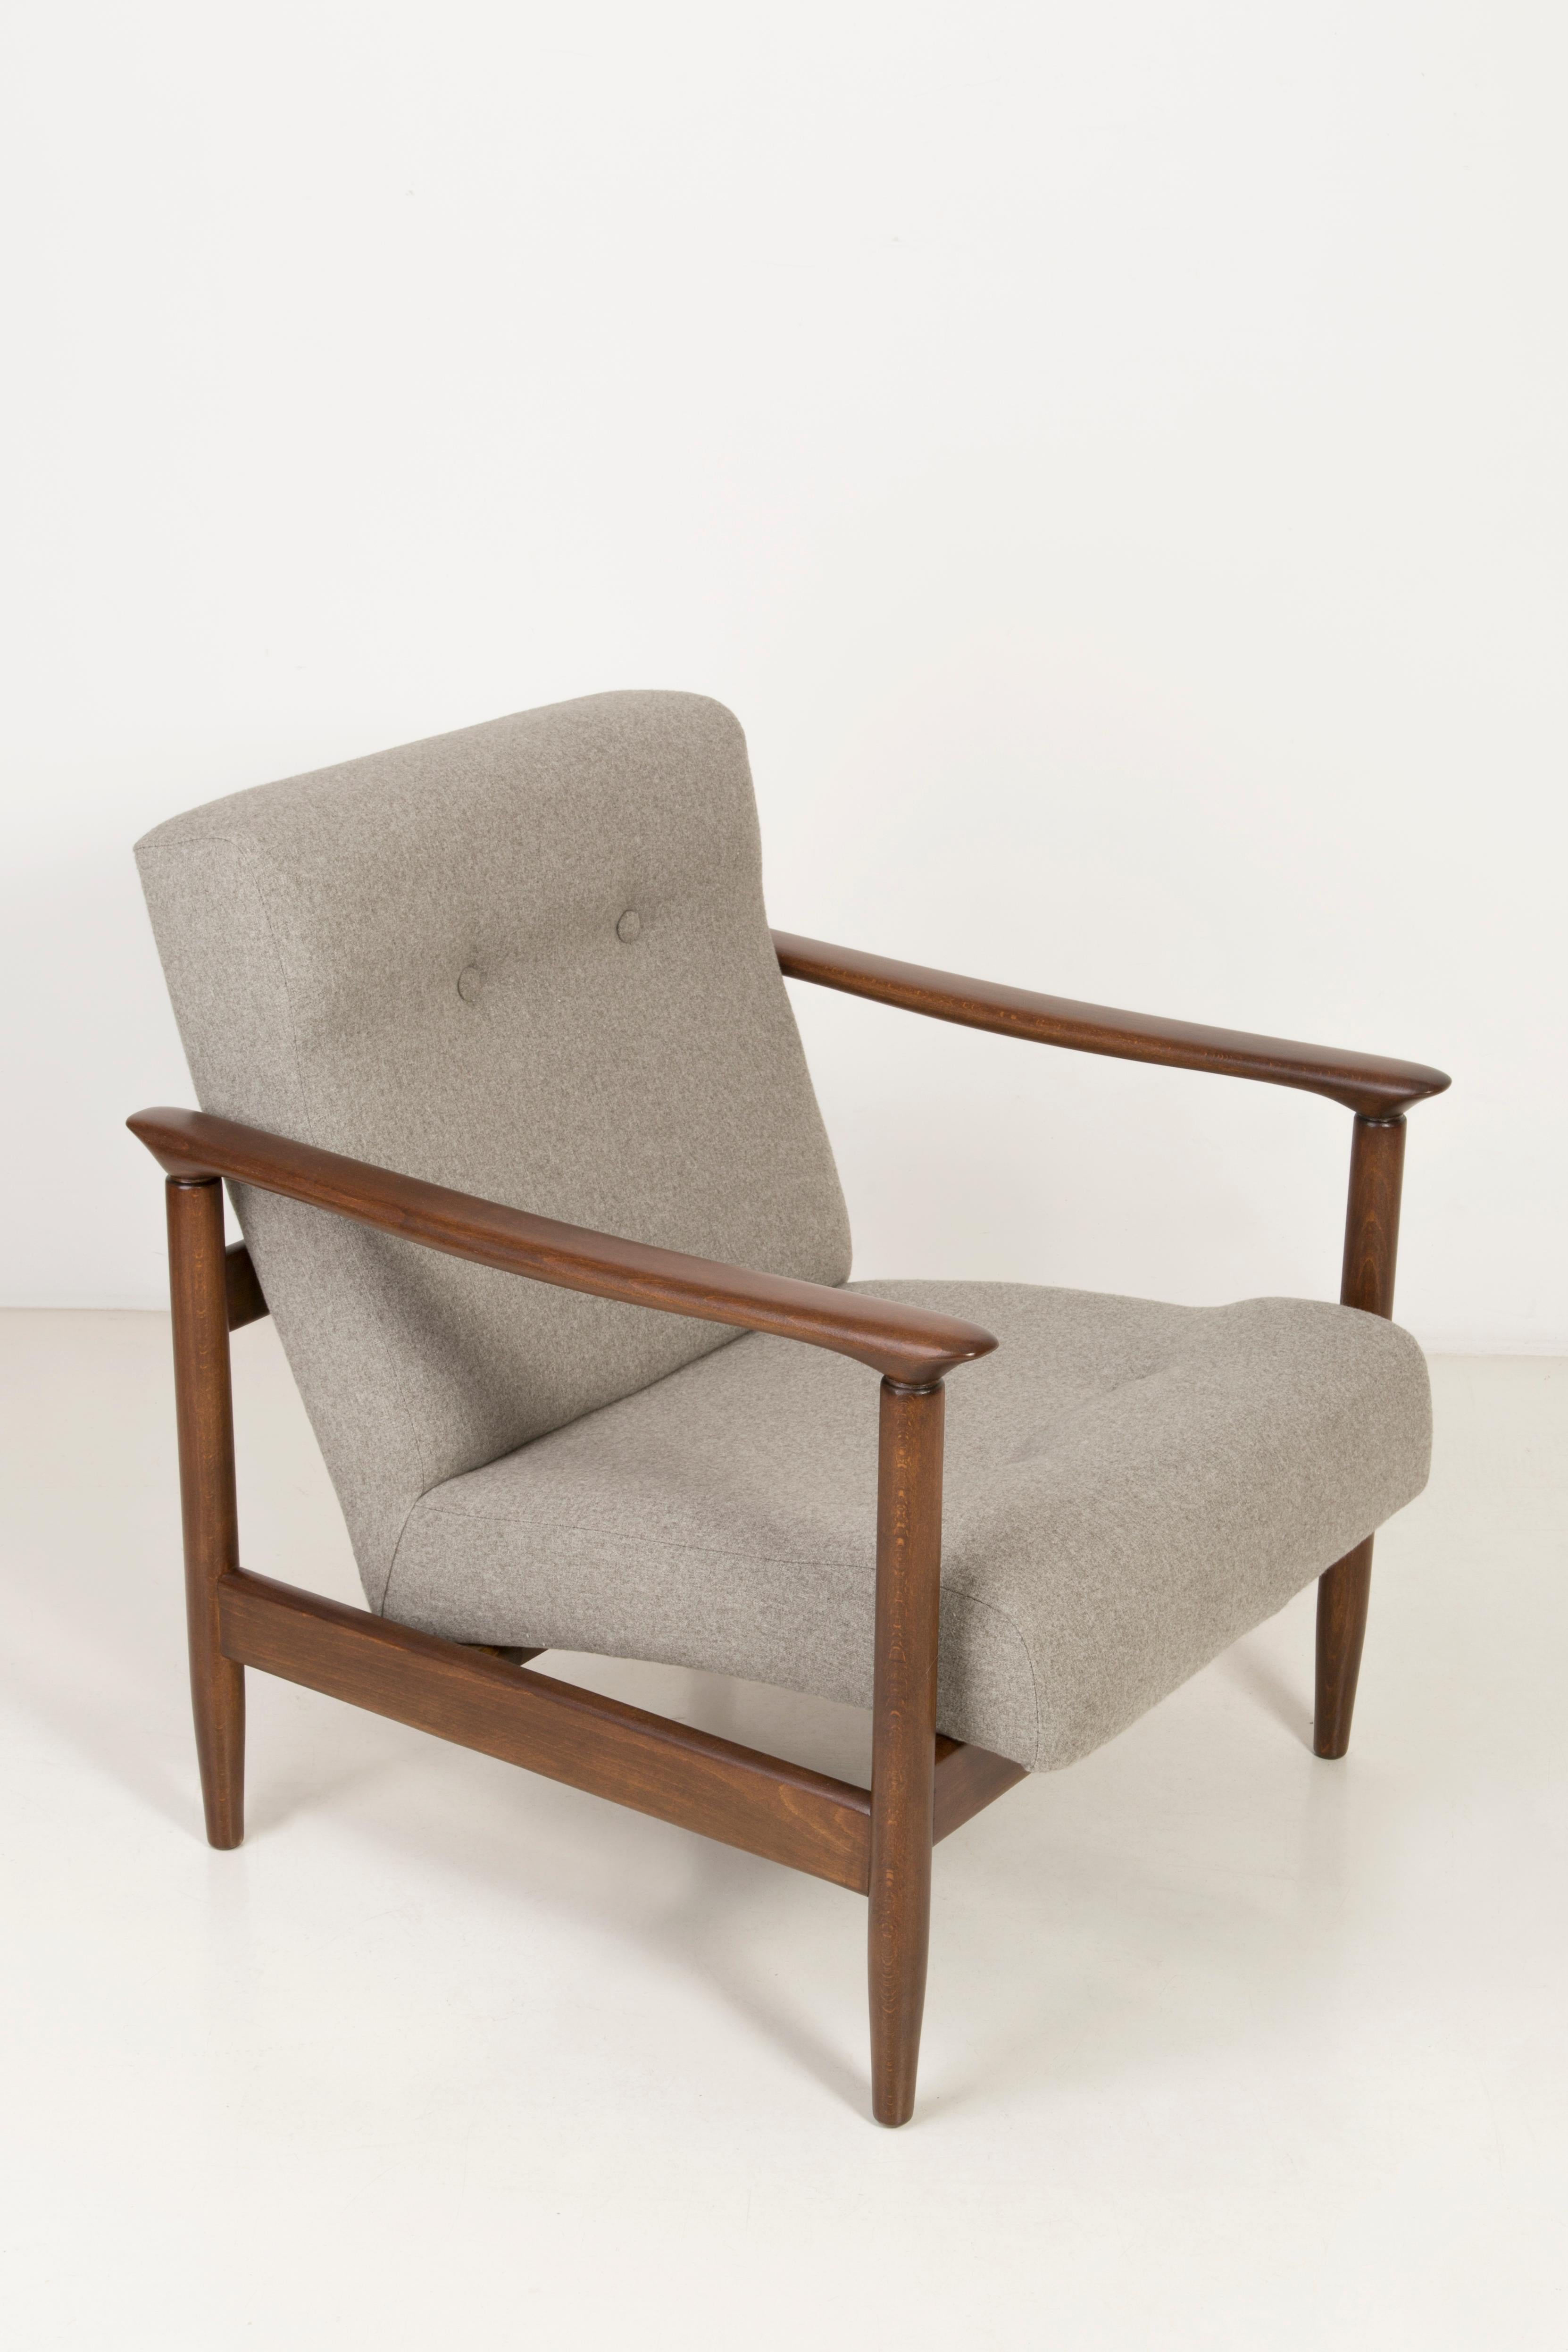 Armchair GFM-142, designed by Edmund Homa. The armchair was made in the 1960s in the Gosciecinska Furniture Factory. Material is solid beechwood. The GFM-142 armchair is regarded one of the best polish armchair design from the previous age. The